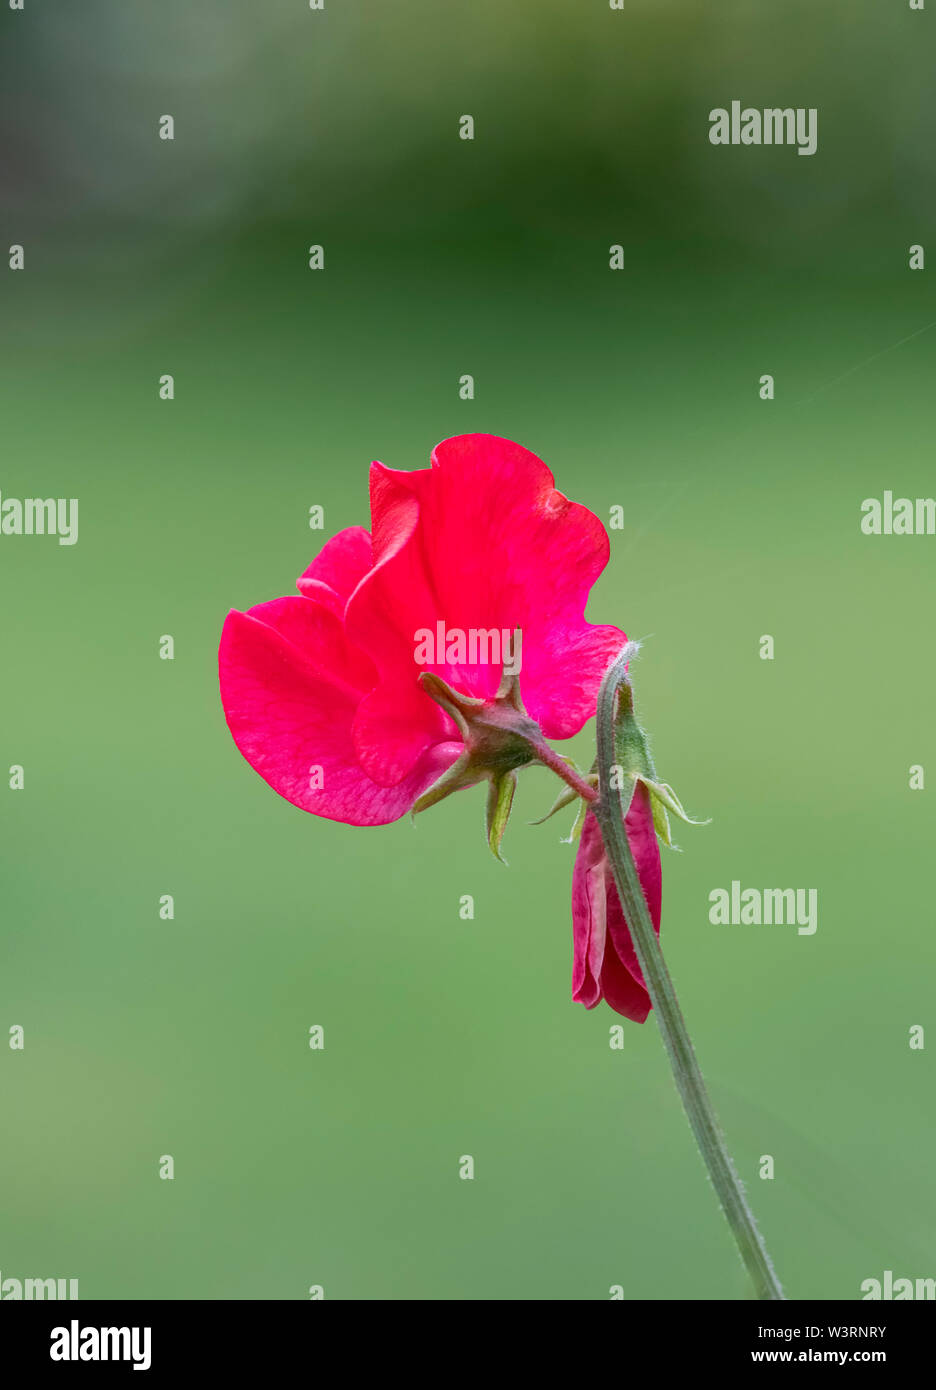 Beautiful cerise coloured Sweet Pea flower isolated against a plain green background Stock Photo